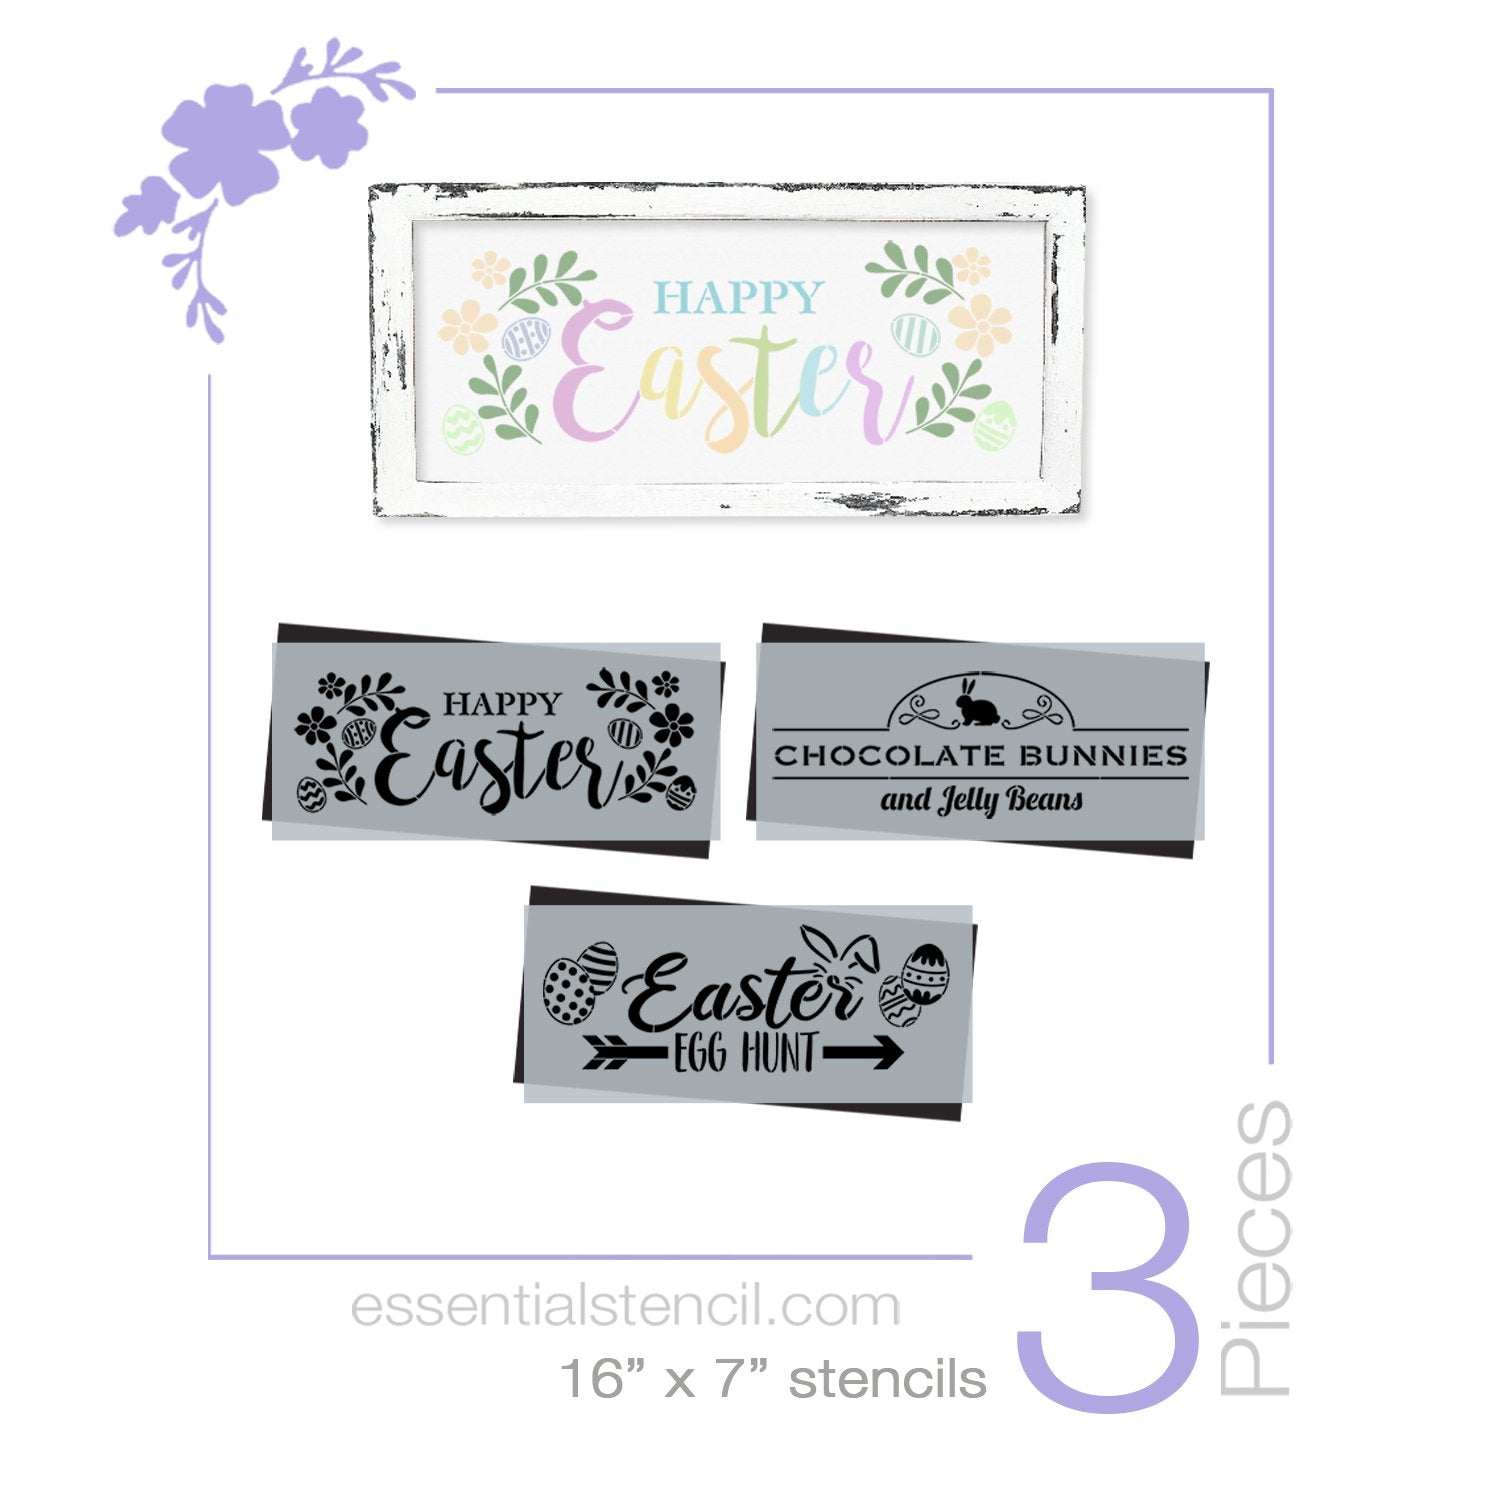 Happy Easter Stencil Set (3 Pack) Easter Egg Hunt, Chocolate bunnies and jelly beans stencil